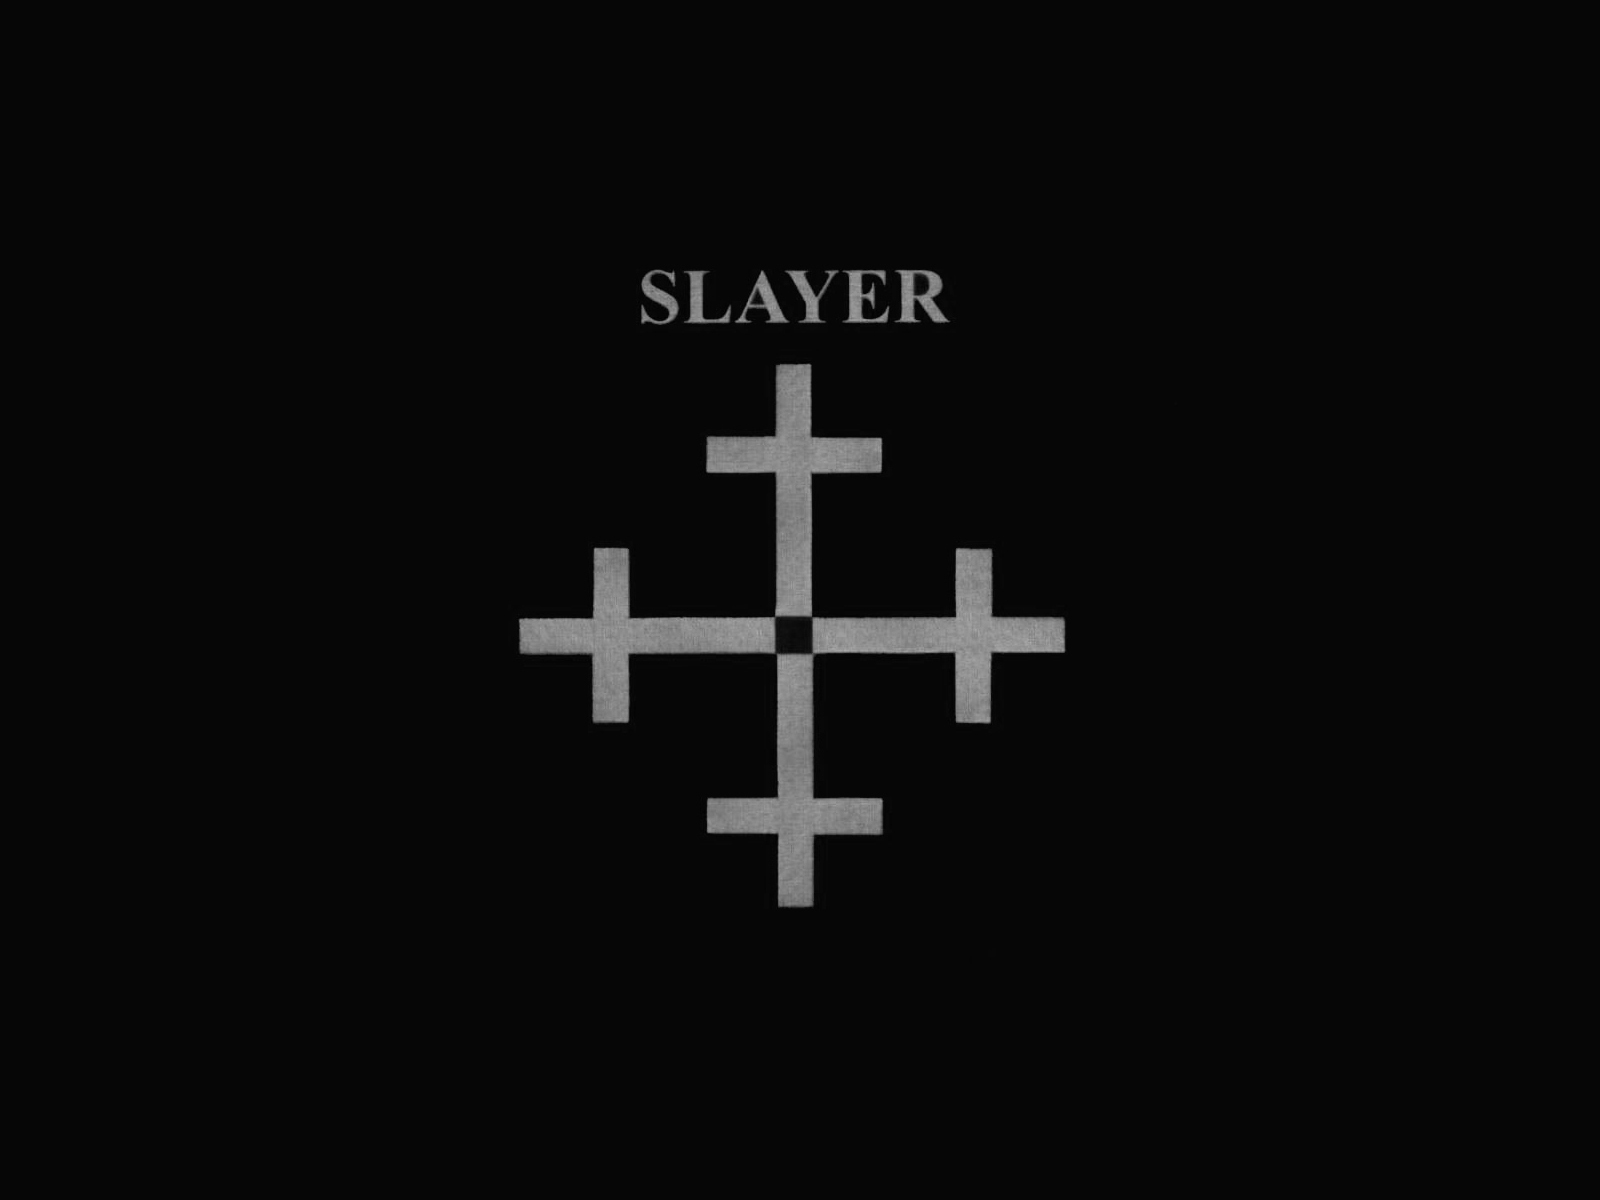 slayer groups bands music heavy metal death hard rock album covers